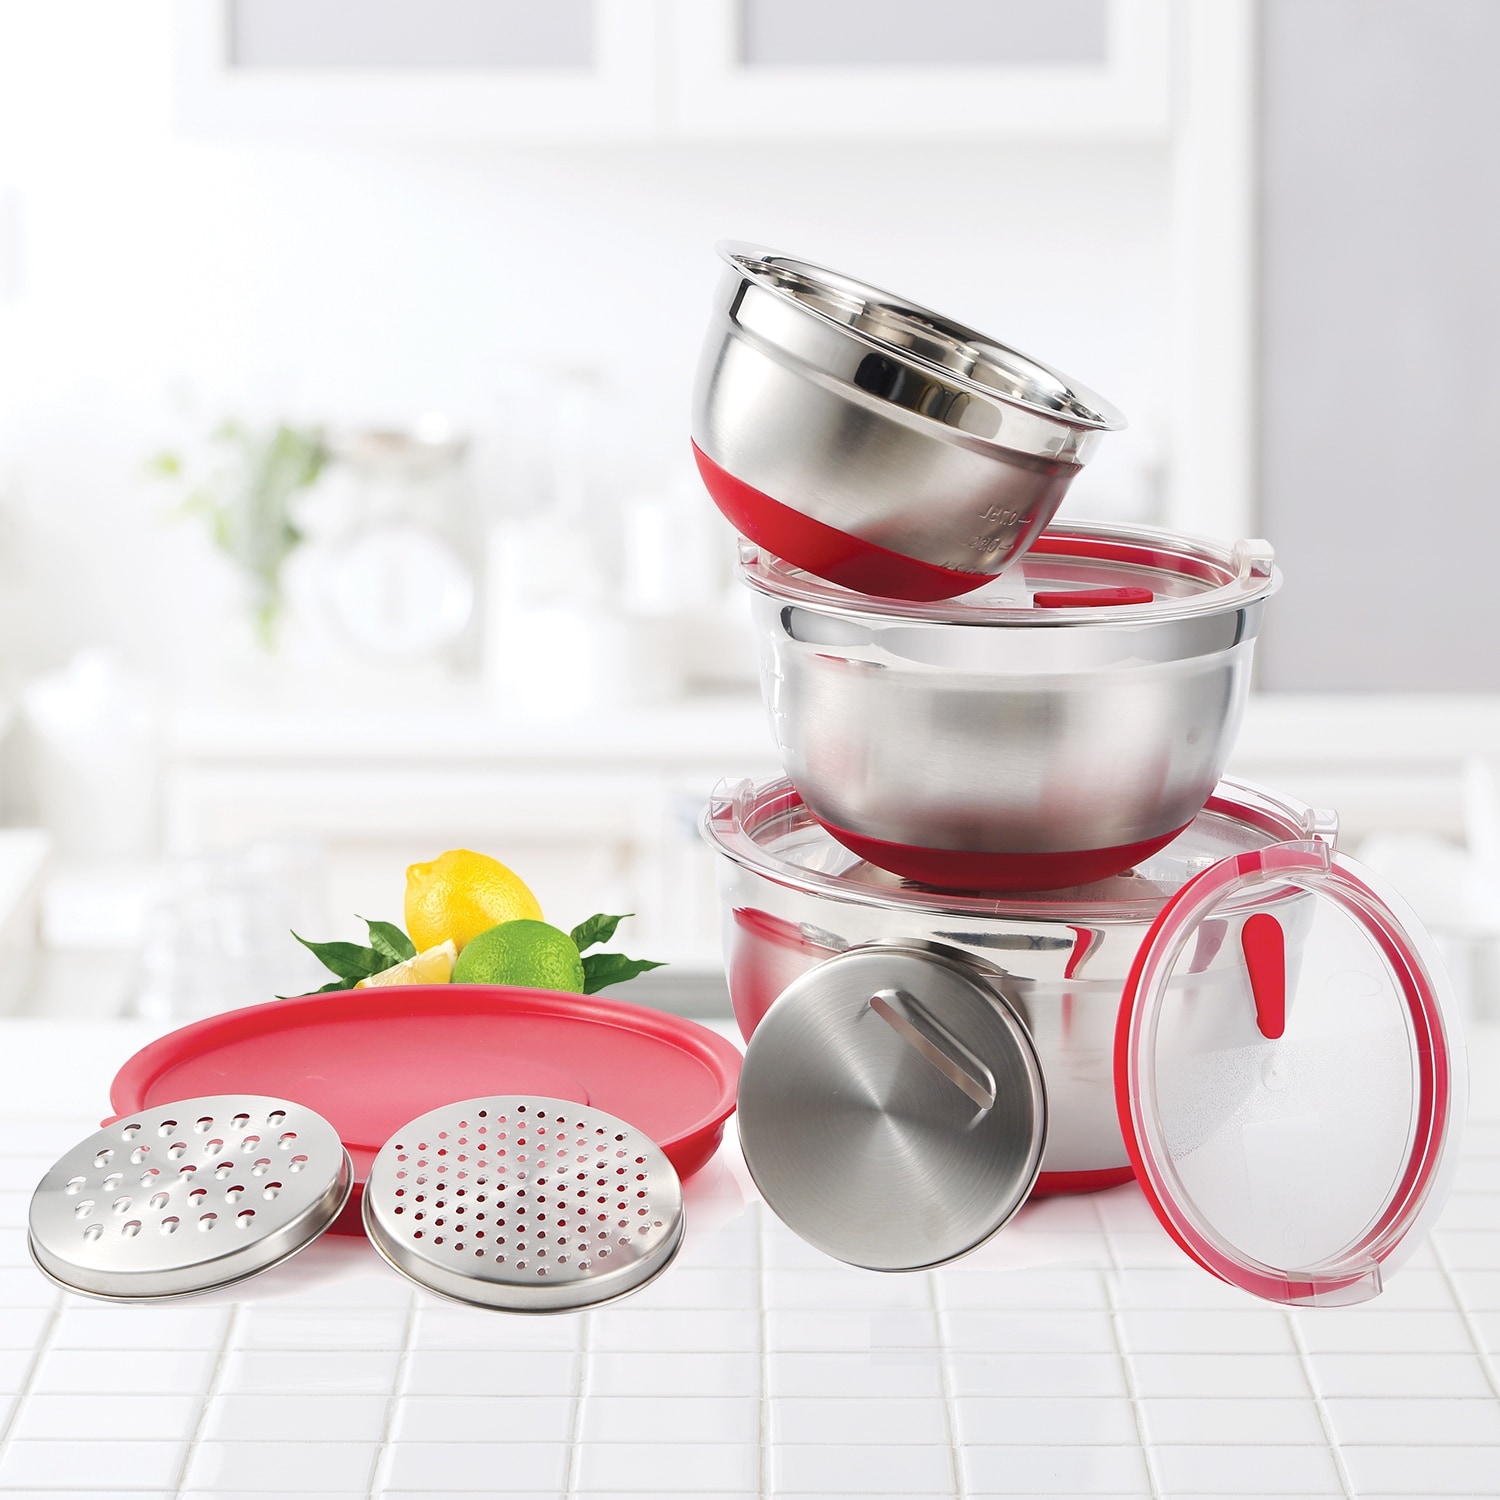 https://ak1.ostkcdn.com/images/products/is/images/direct/d4fa45c543457e7e6a3e243e82e3310d7019ad7a/Gourmet-Edge-10pc-Stainless-Steel-Mixing-Bowl-Set.jpg